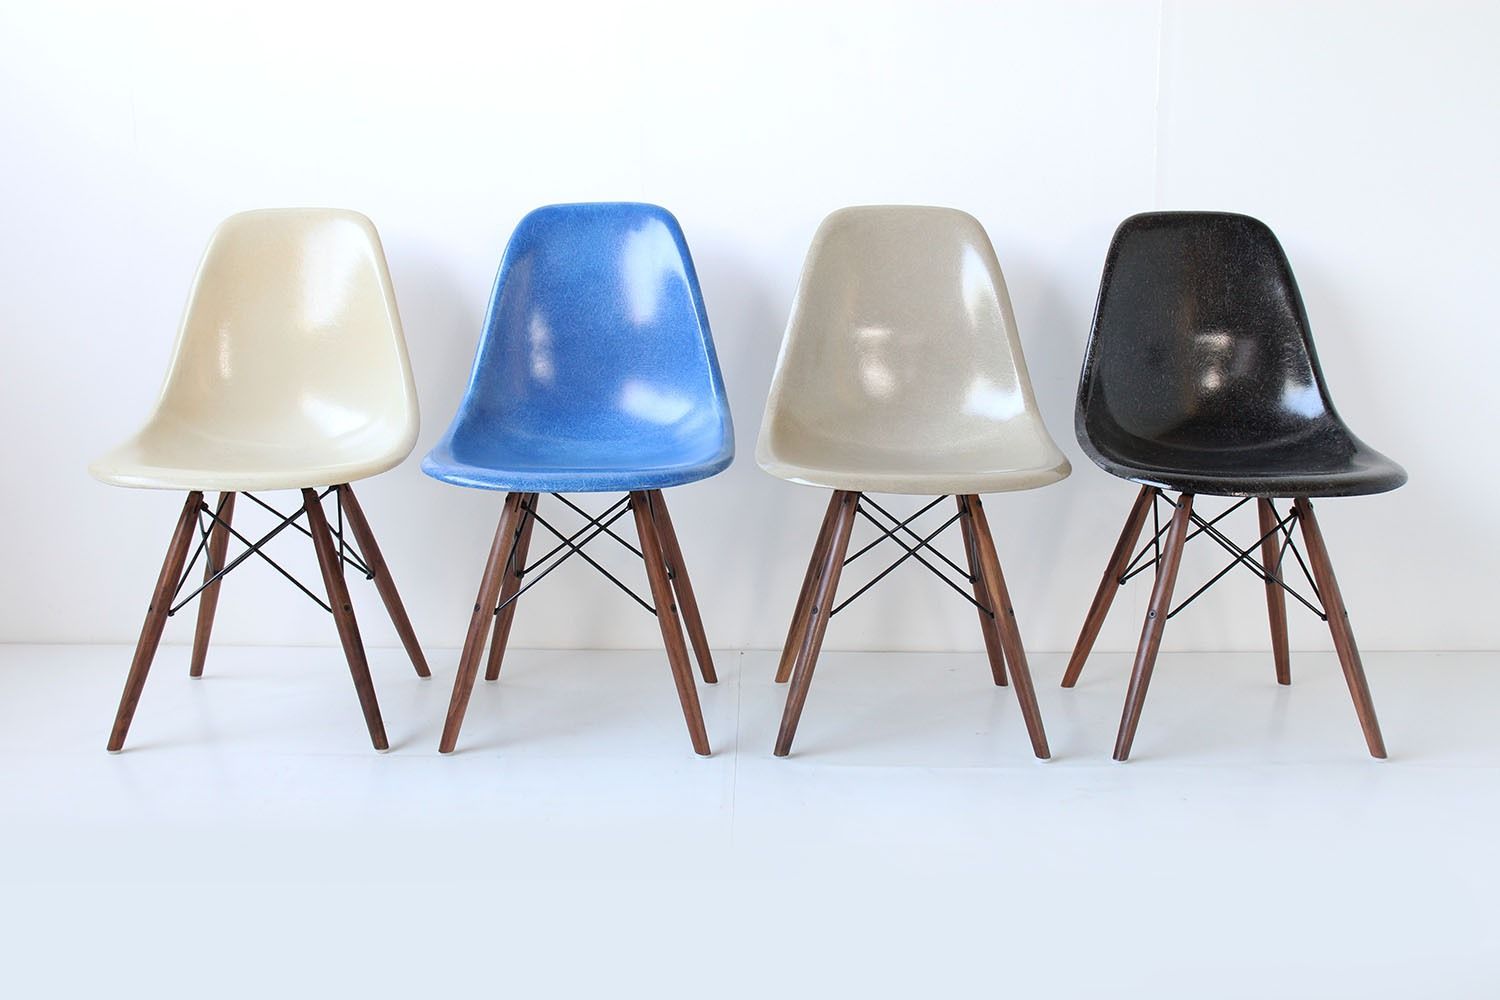 Charles and Ray Eames chairs